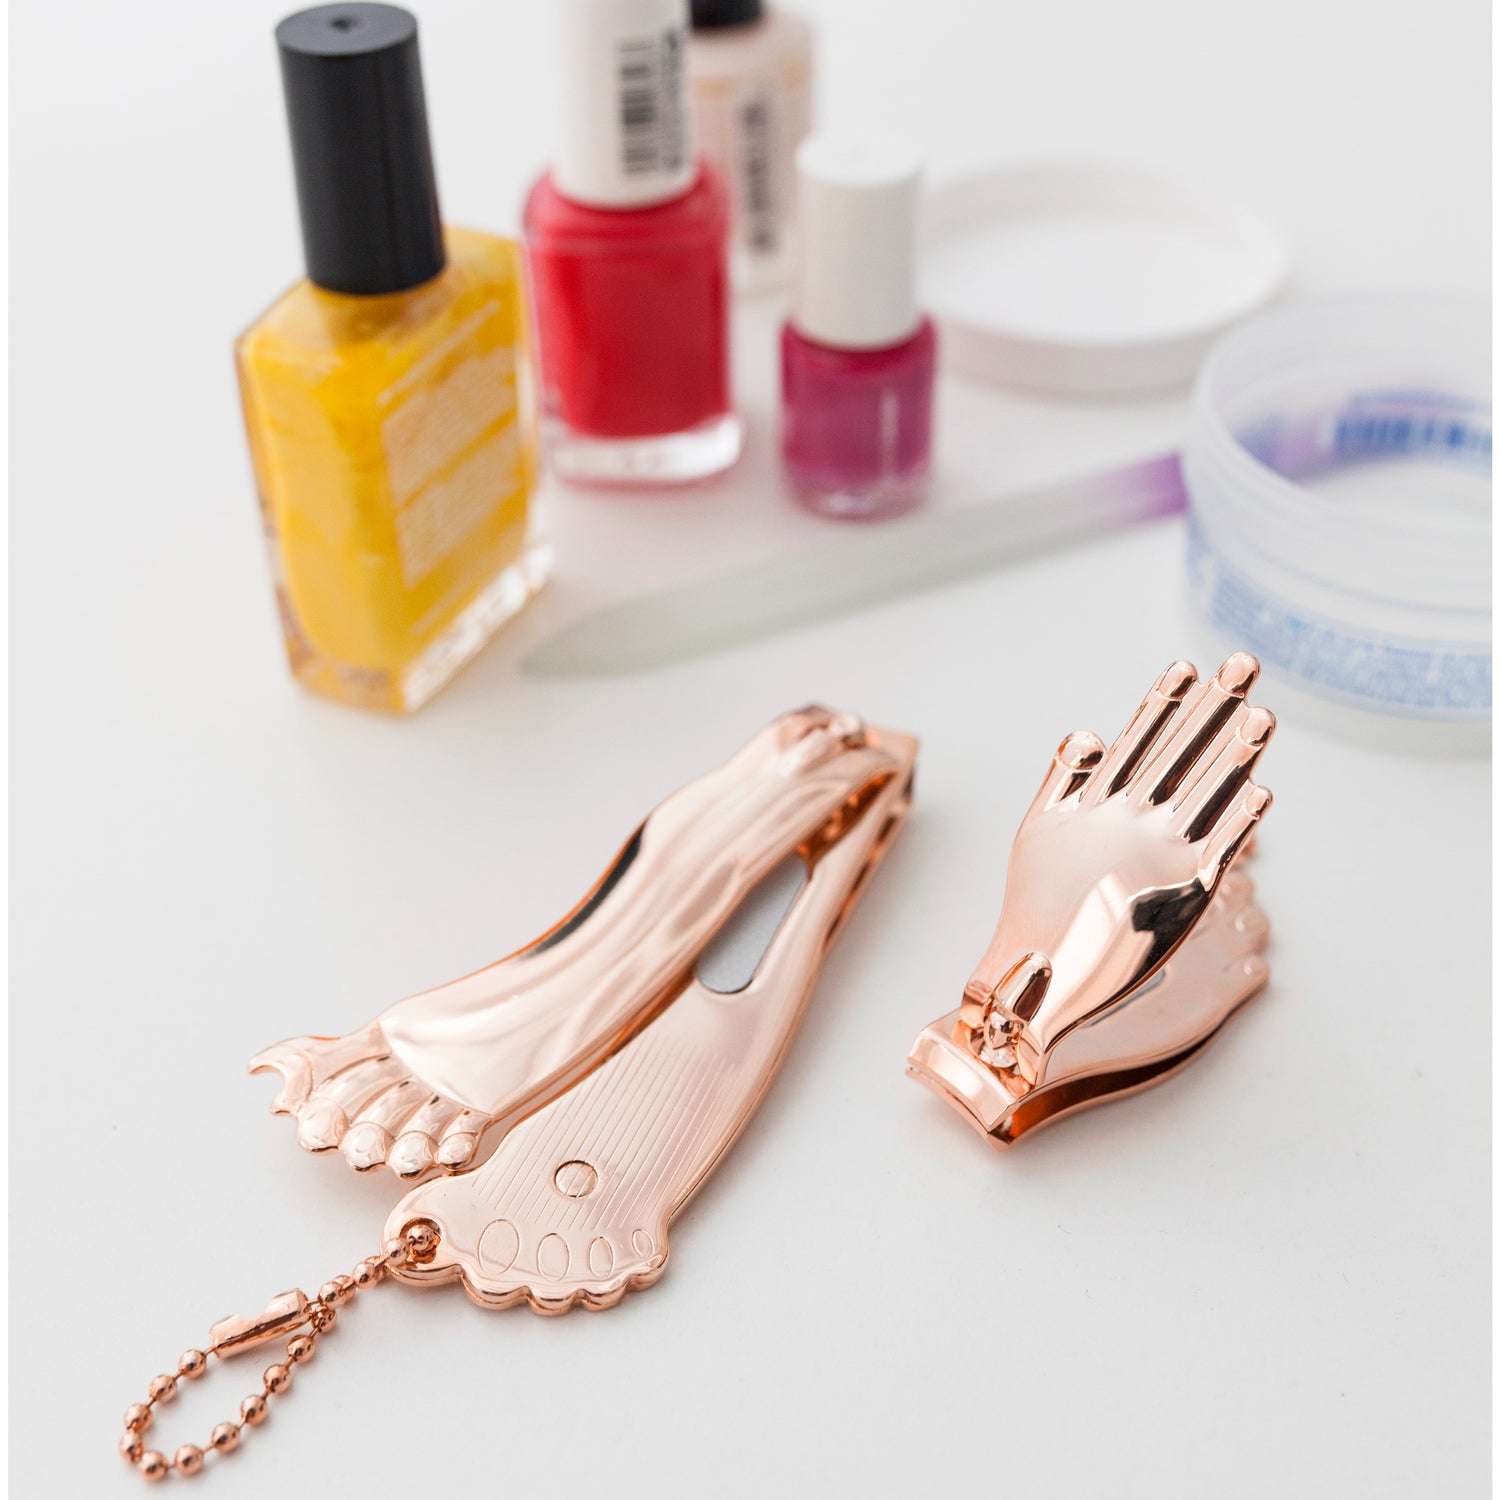 https://cdn.shopify.com/s/files/1/1140/3964/products/MN11CP_copper_hand_and_foot_nail_clipper_action2.jpg?v=1575321606&width=1500